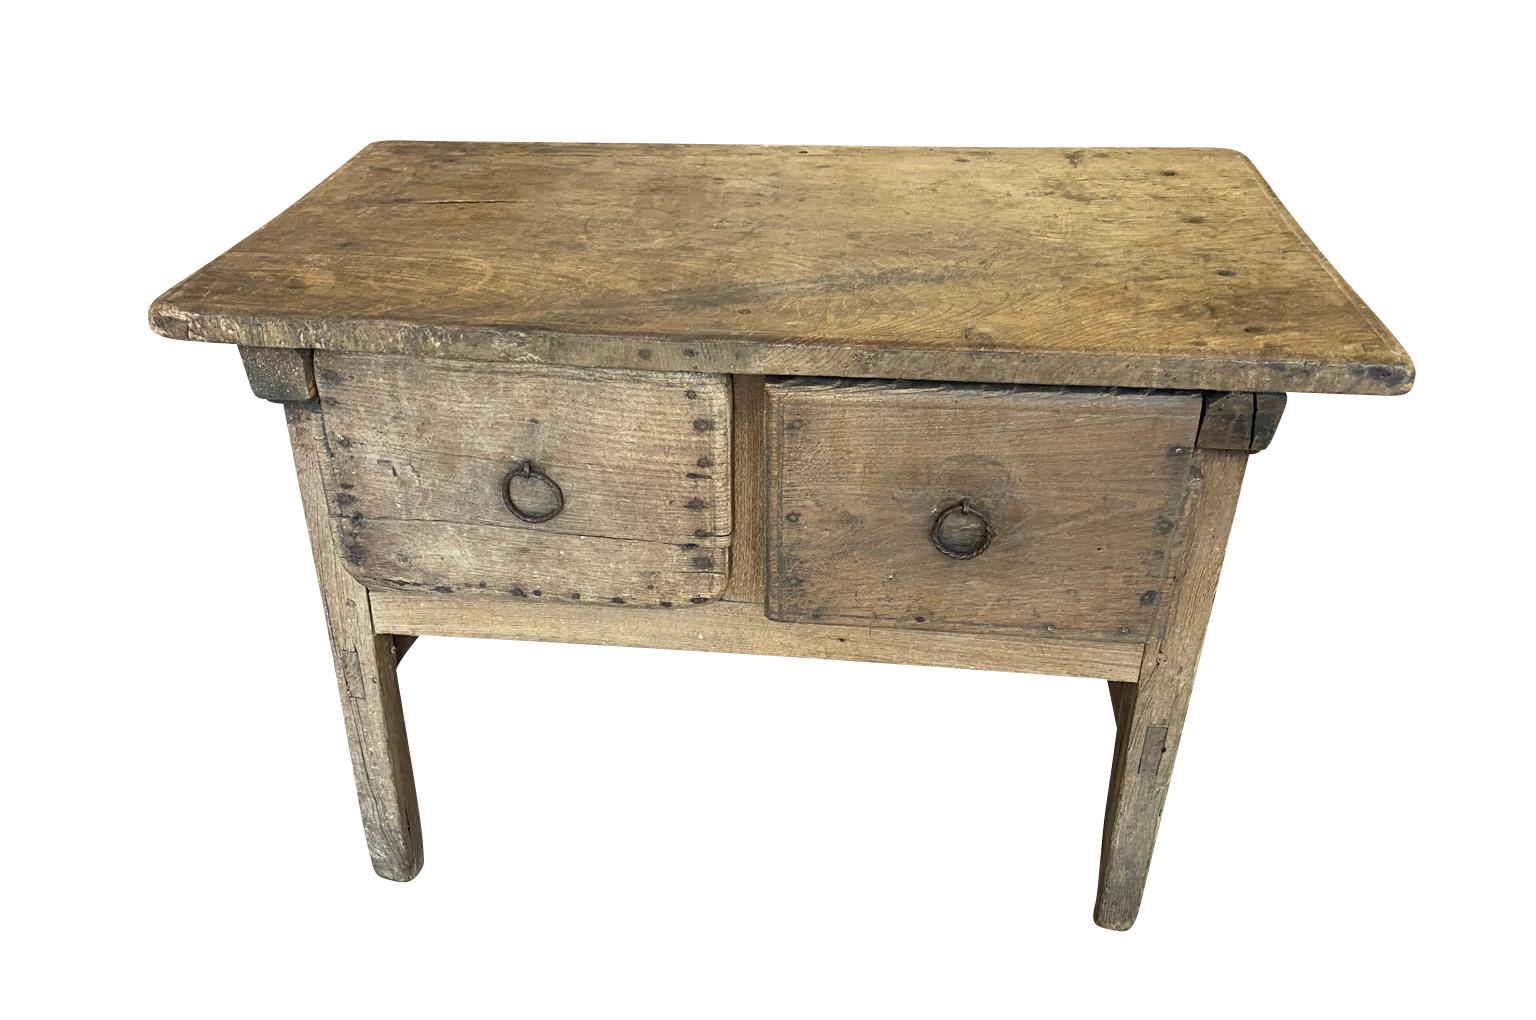 A very handsome 17th century Side Table from the Catalan region of Spain.  Soundly constructed from naturally washed chestnut with 2 drawers.  Clean minimalist lines and wonderful patina.